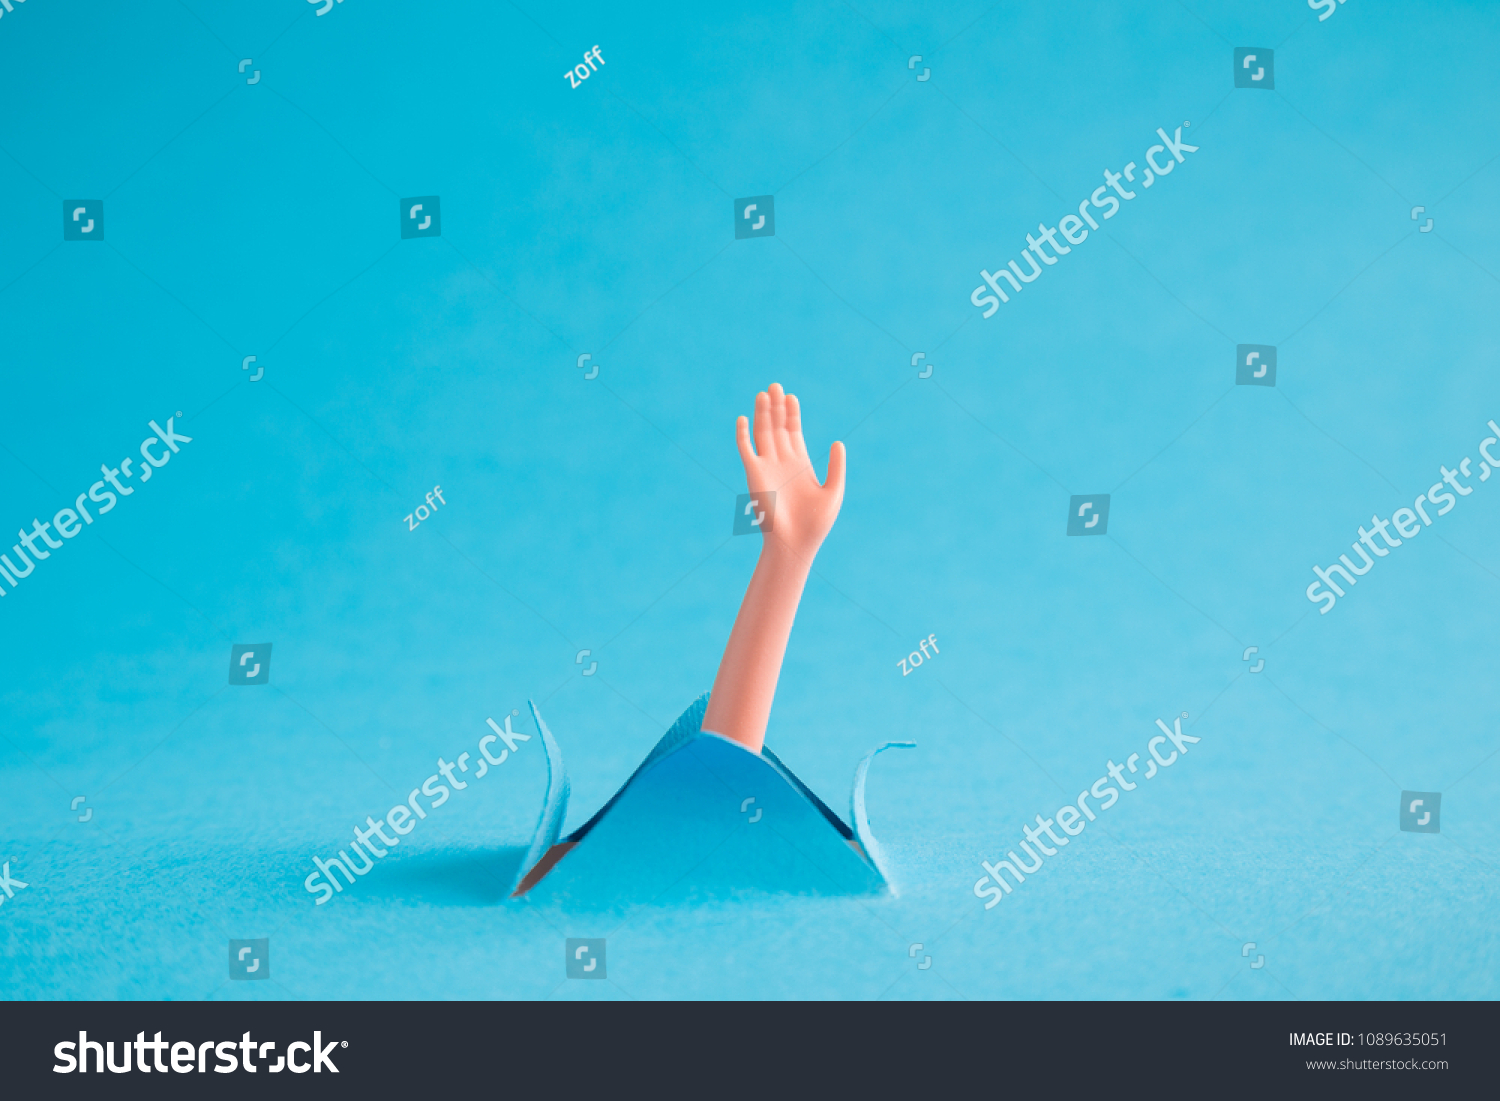 Doll arm emerging from blue paper background. Drowning minimal creative abstract concept. #1089635051